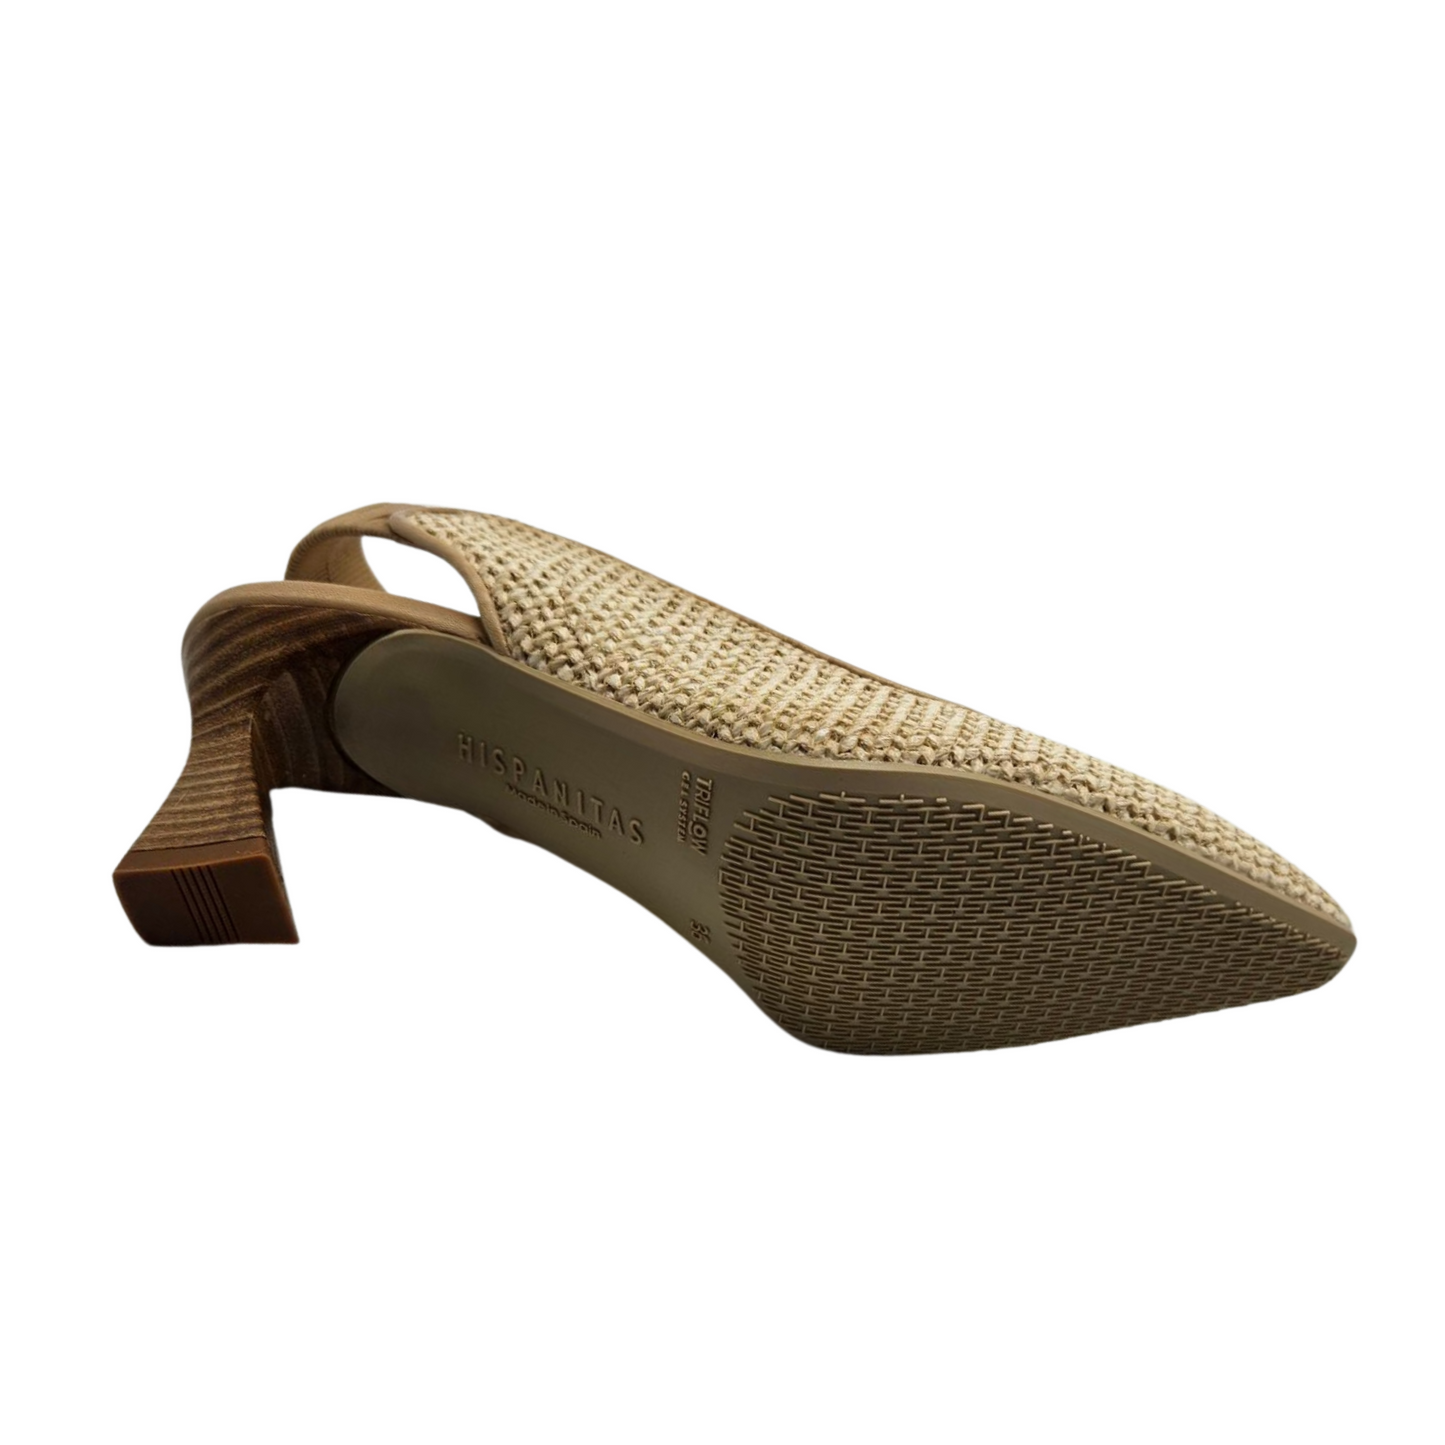 Bottom view of cream coloured woven pump with flared heel and elastic slingback strap